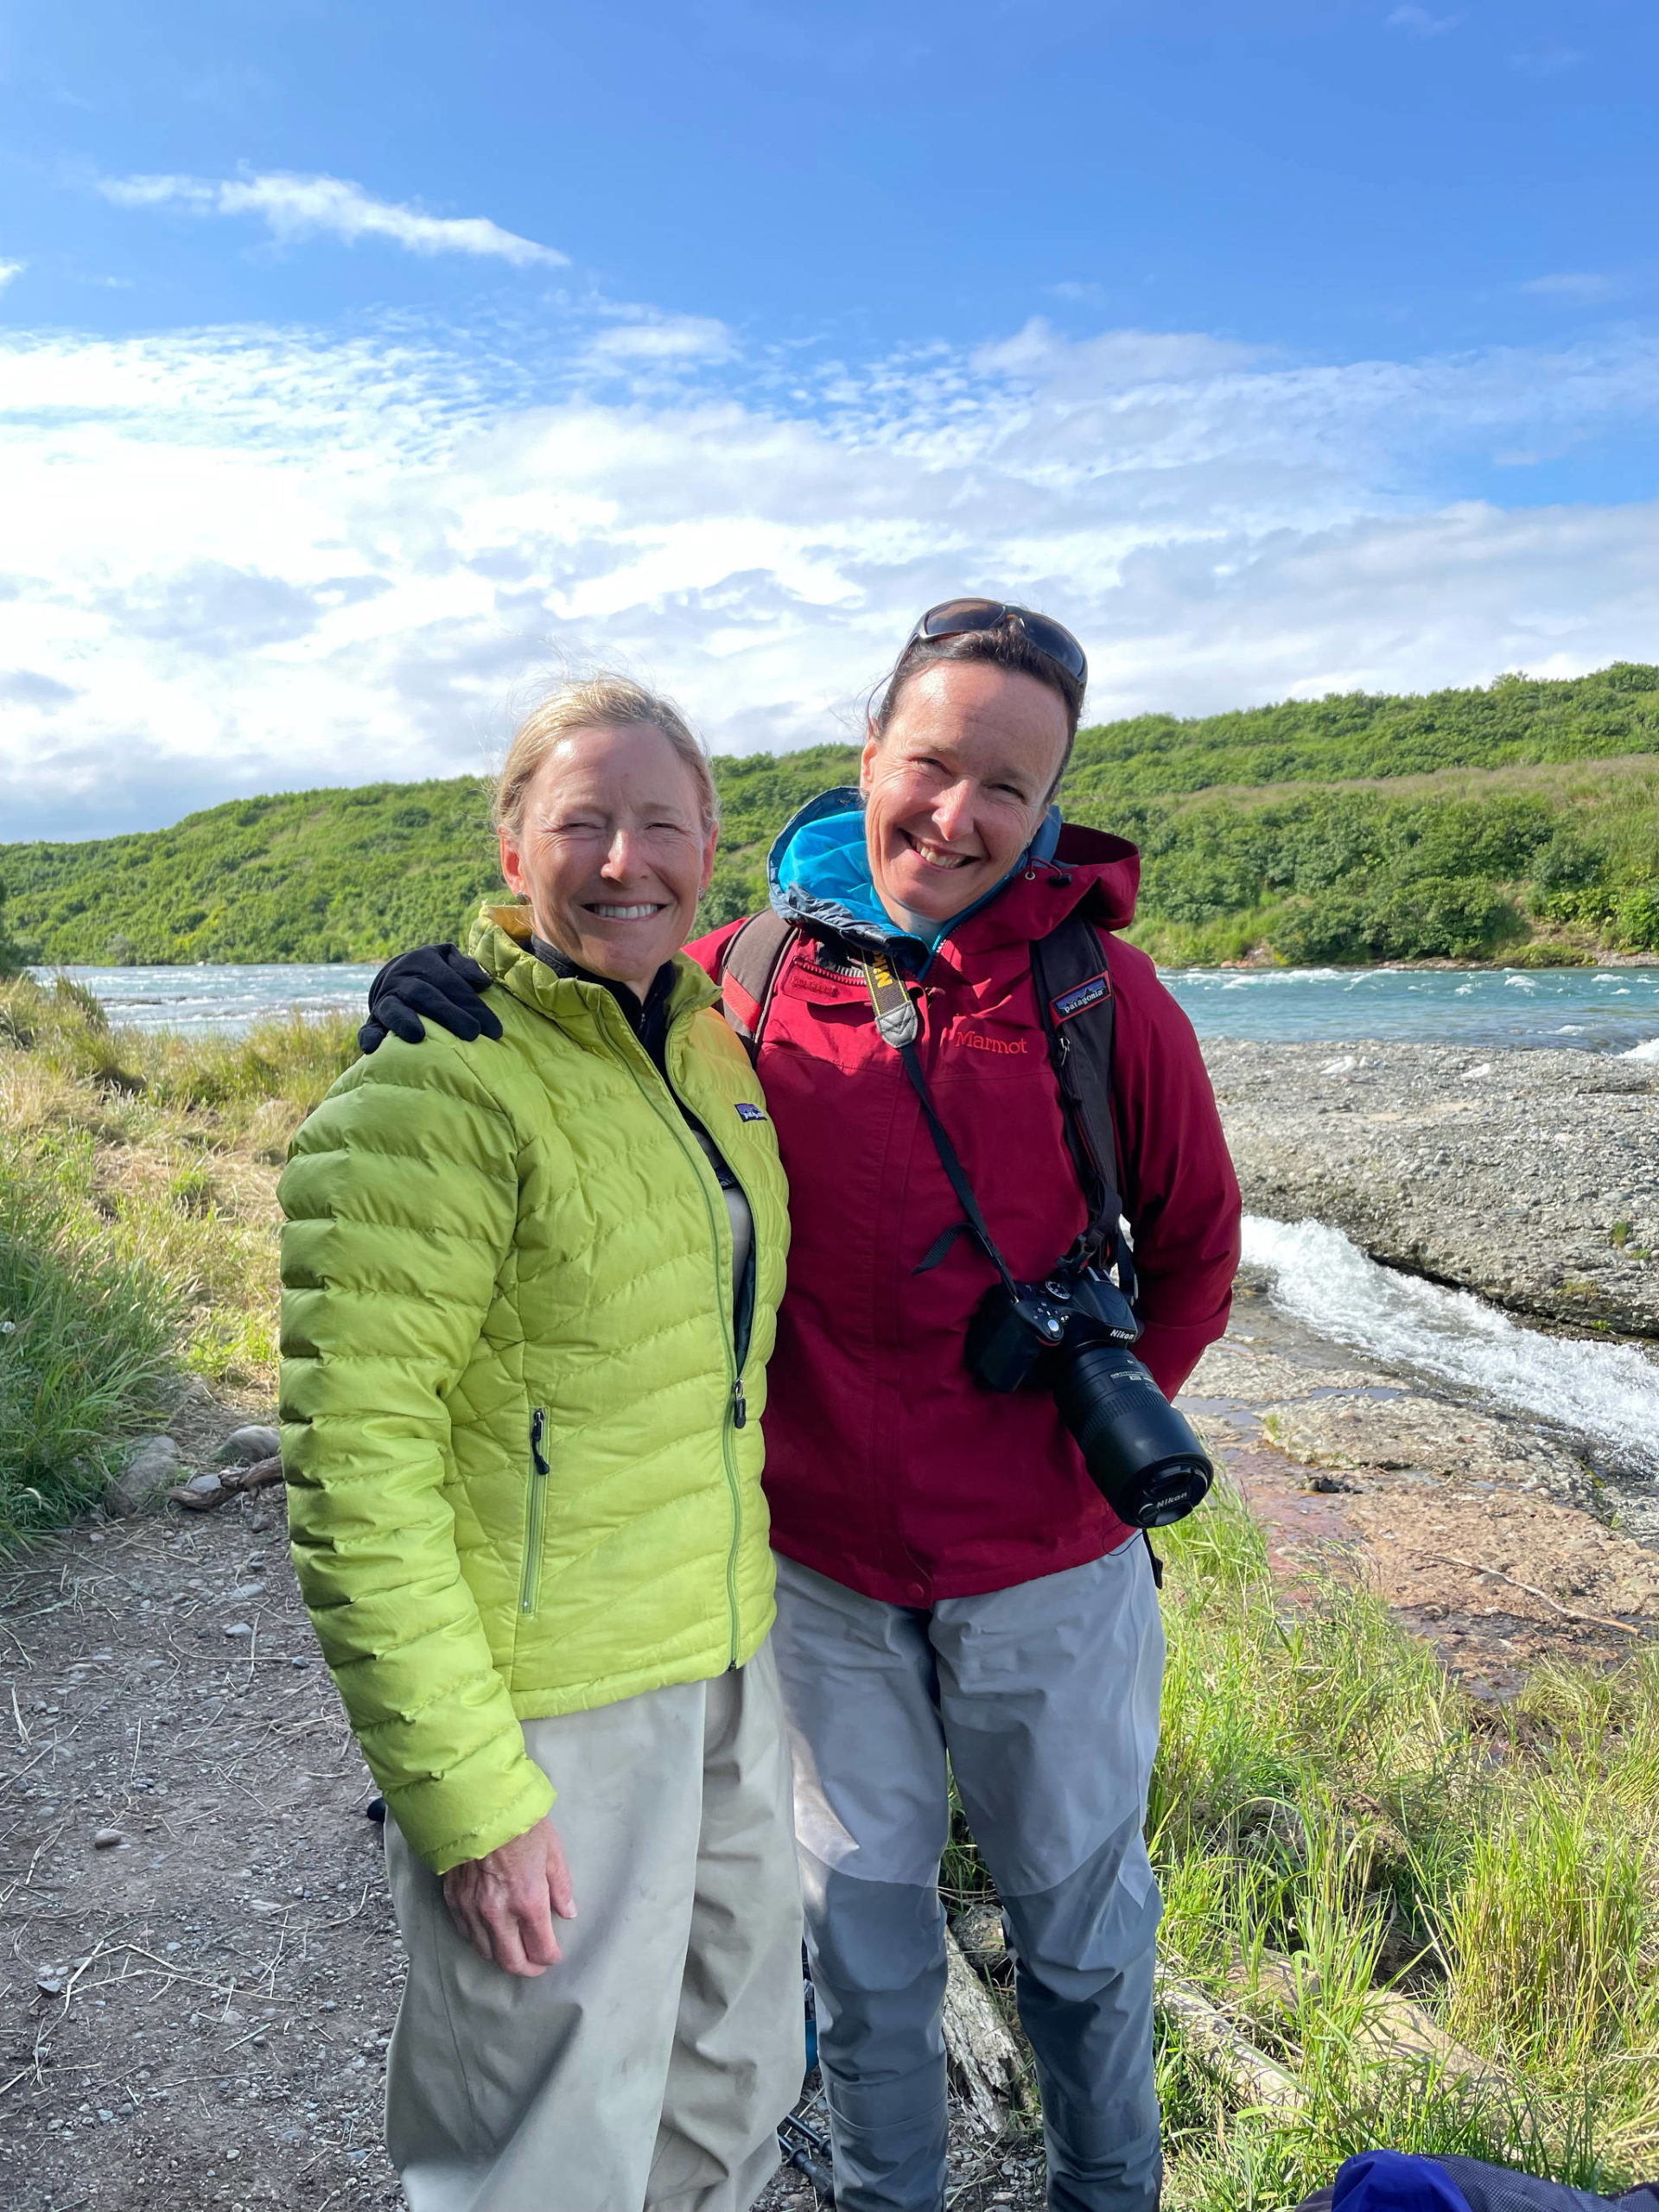 Cindy Buchanan (left) and Lara Hildreth (right) were in Homer after a trip to McNeil River State Game Sanctuary and Refuge when the July 28 magnitude 8.2 earthquake struck. (Photo provided by Cindy Buchanan)